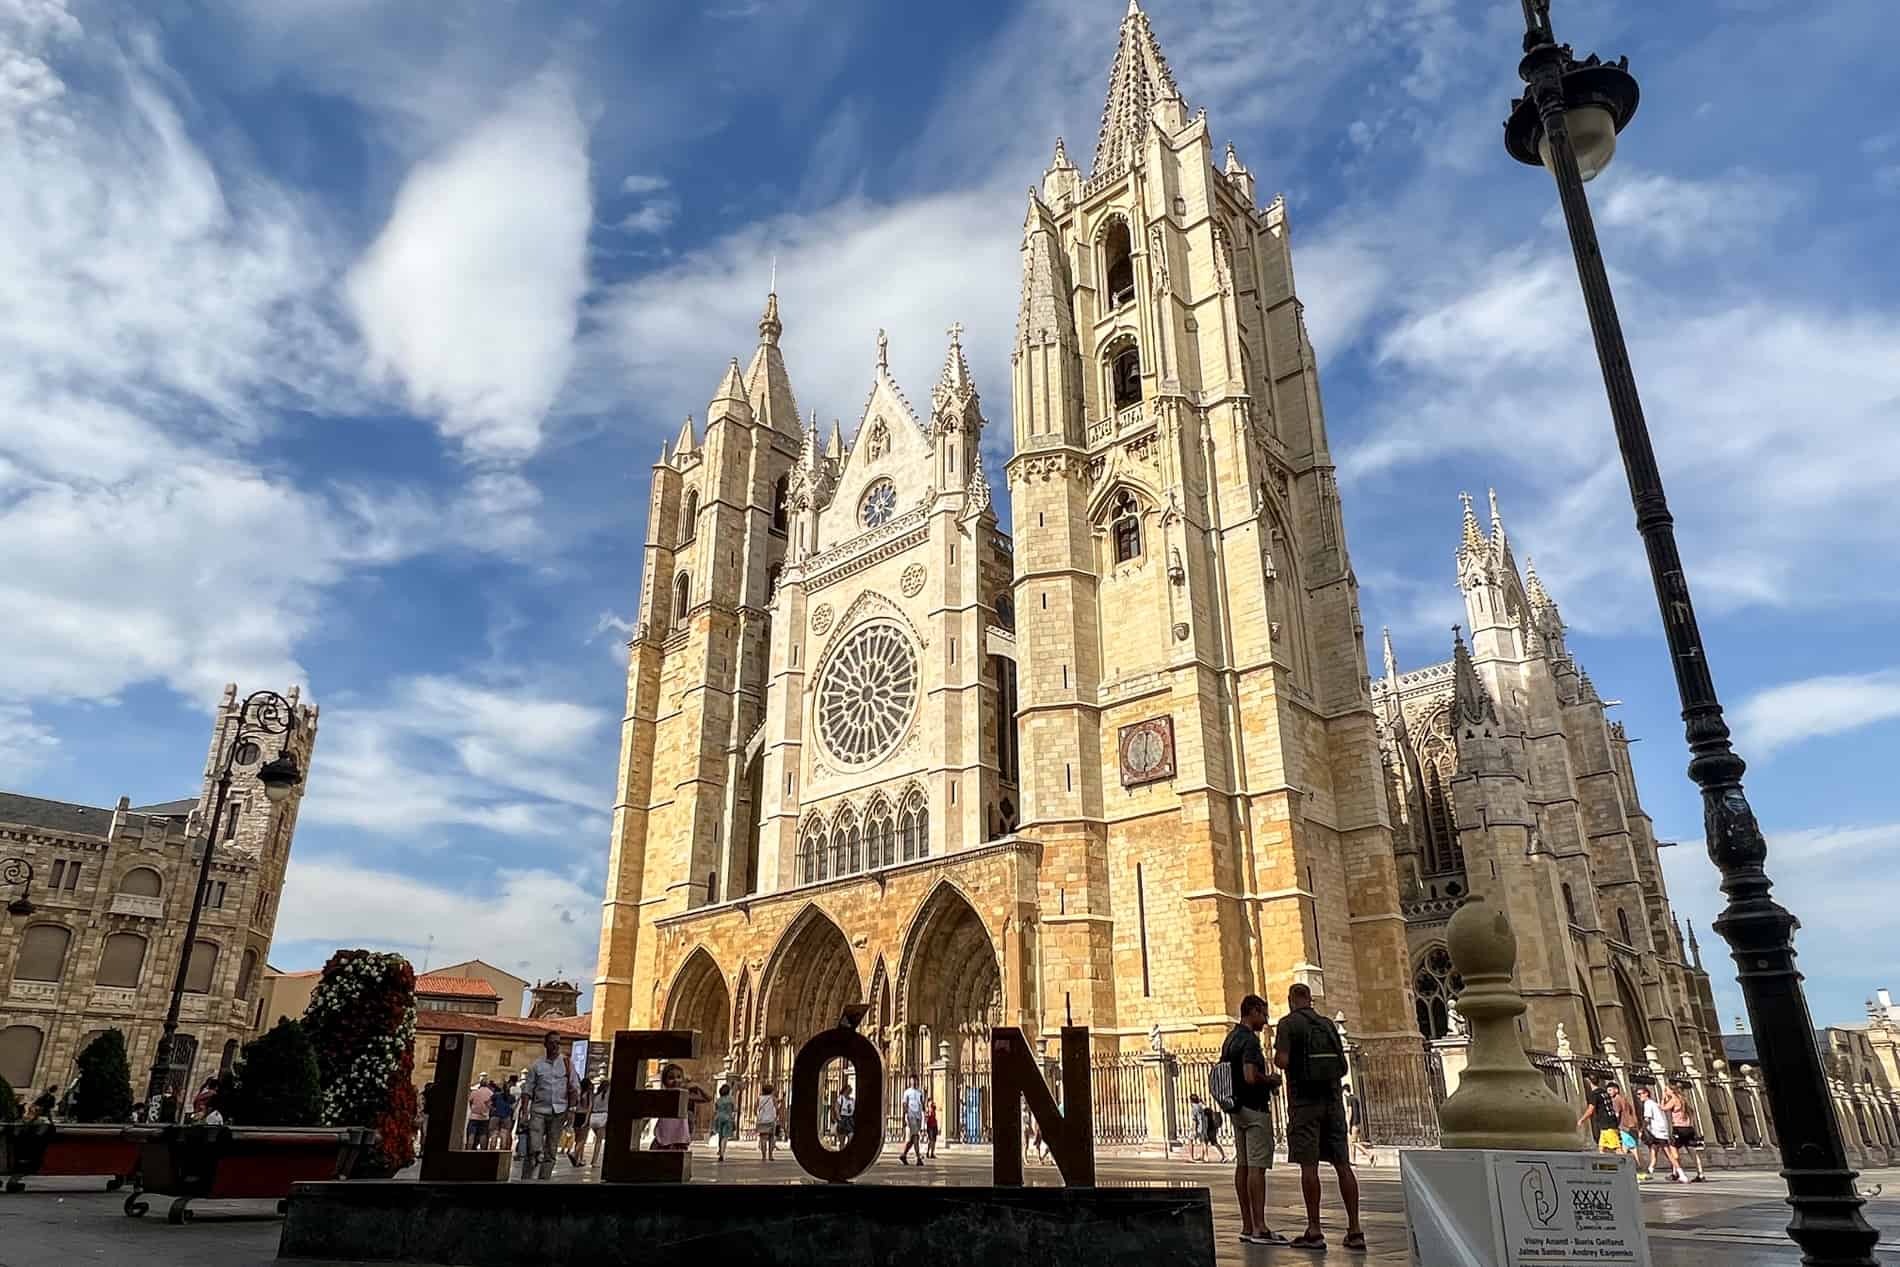 The towering golden gothic structure of Leon Cathedral with a Leon city sign in front of it.